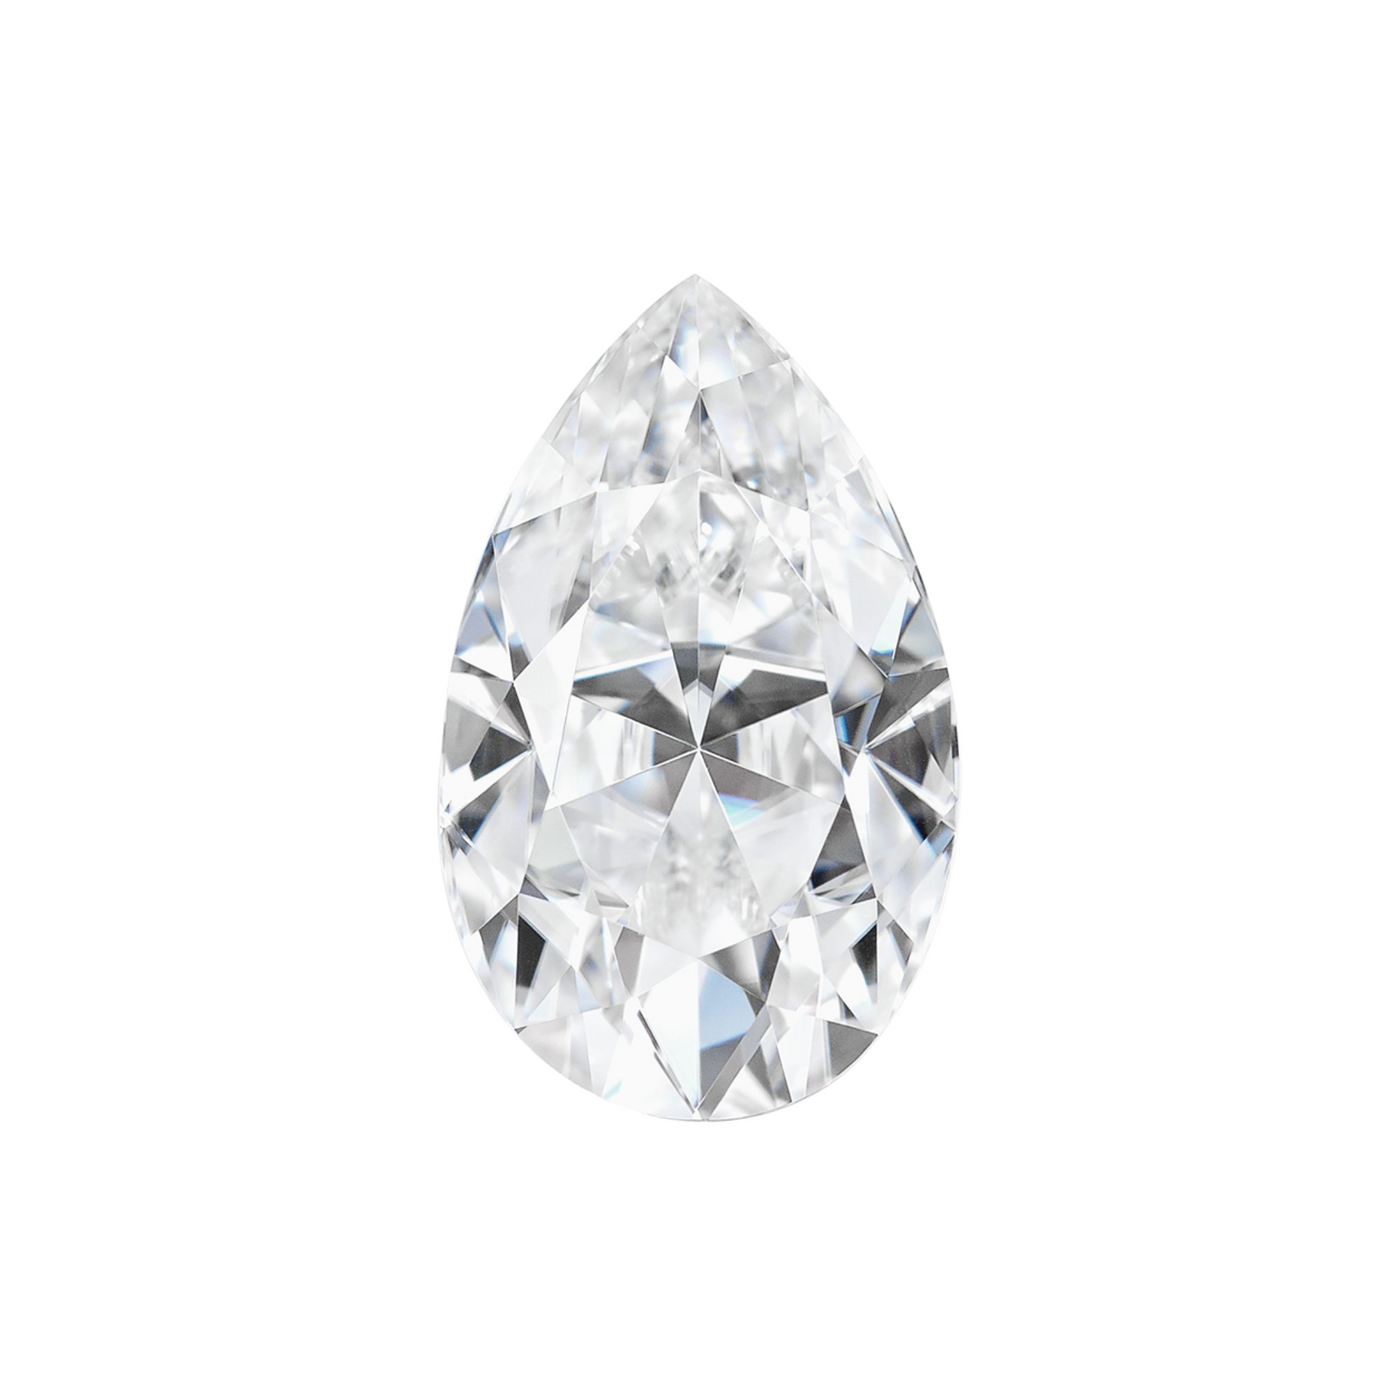 Colorless Moissanite ~ Pear Cut